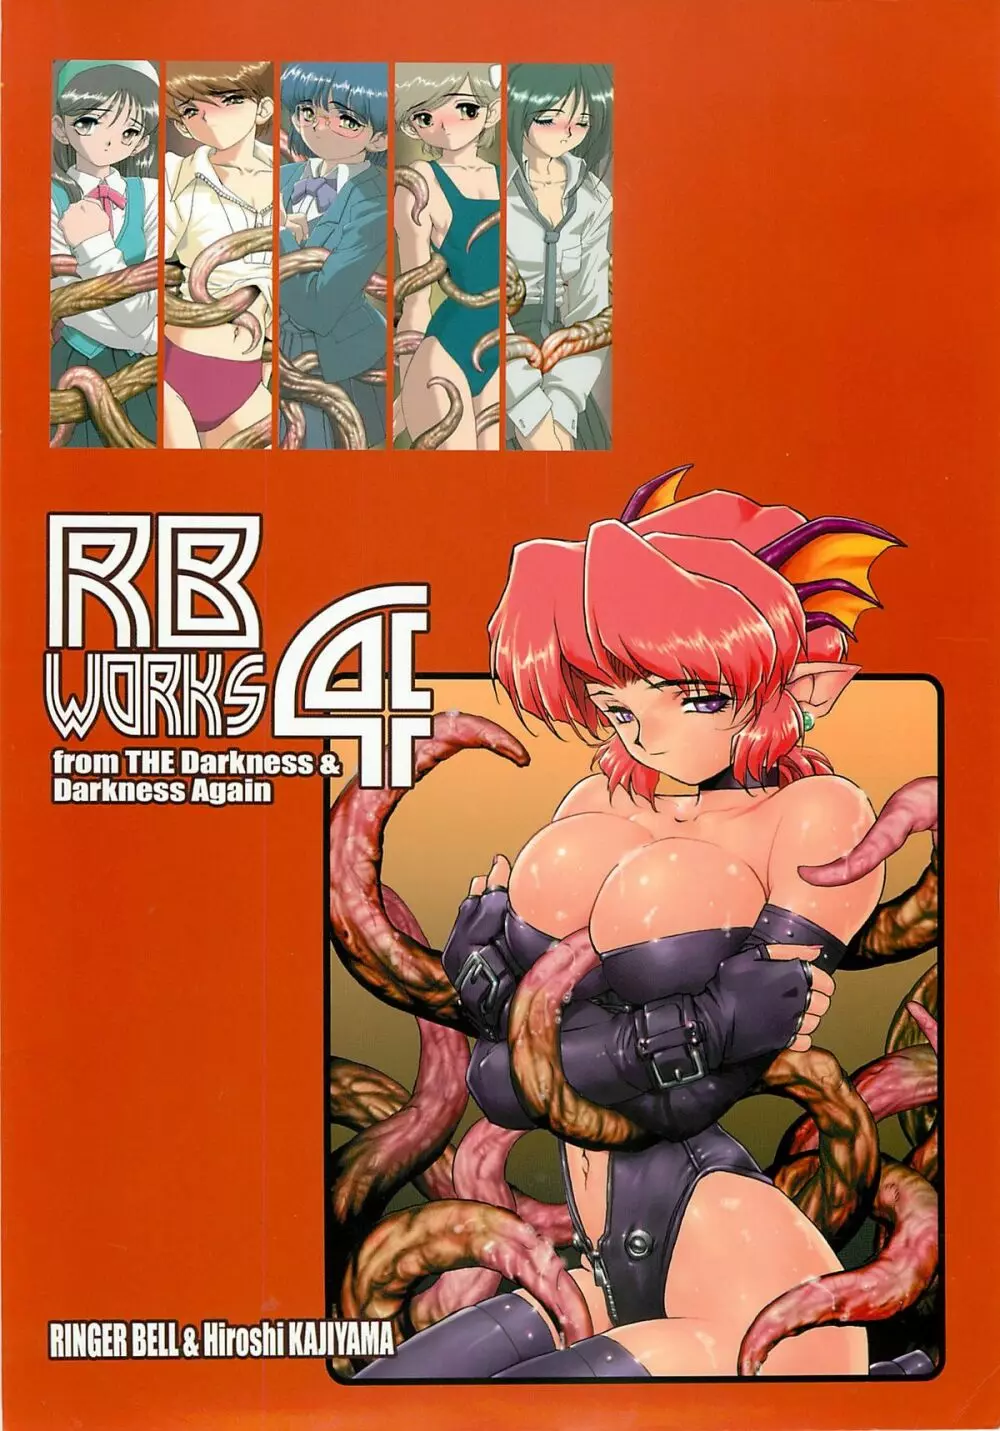 RB Works 4 – From THE Darkness & Darkness Again 82ページ